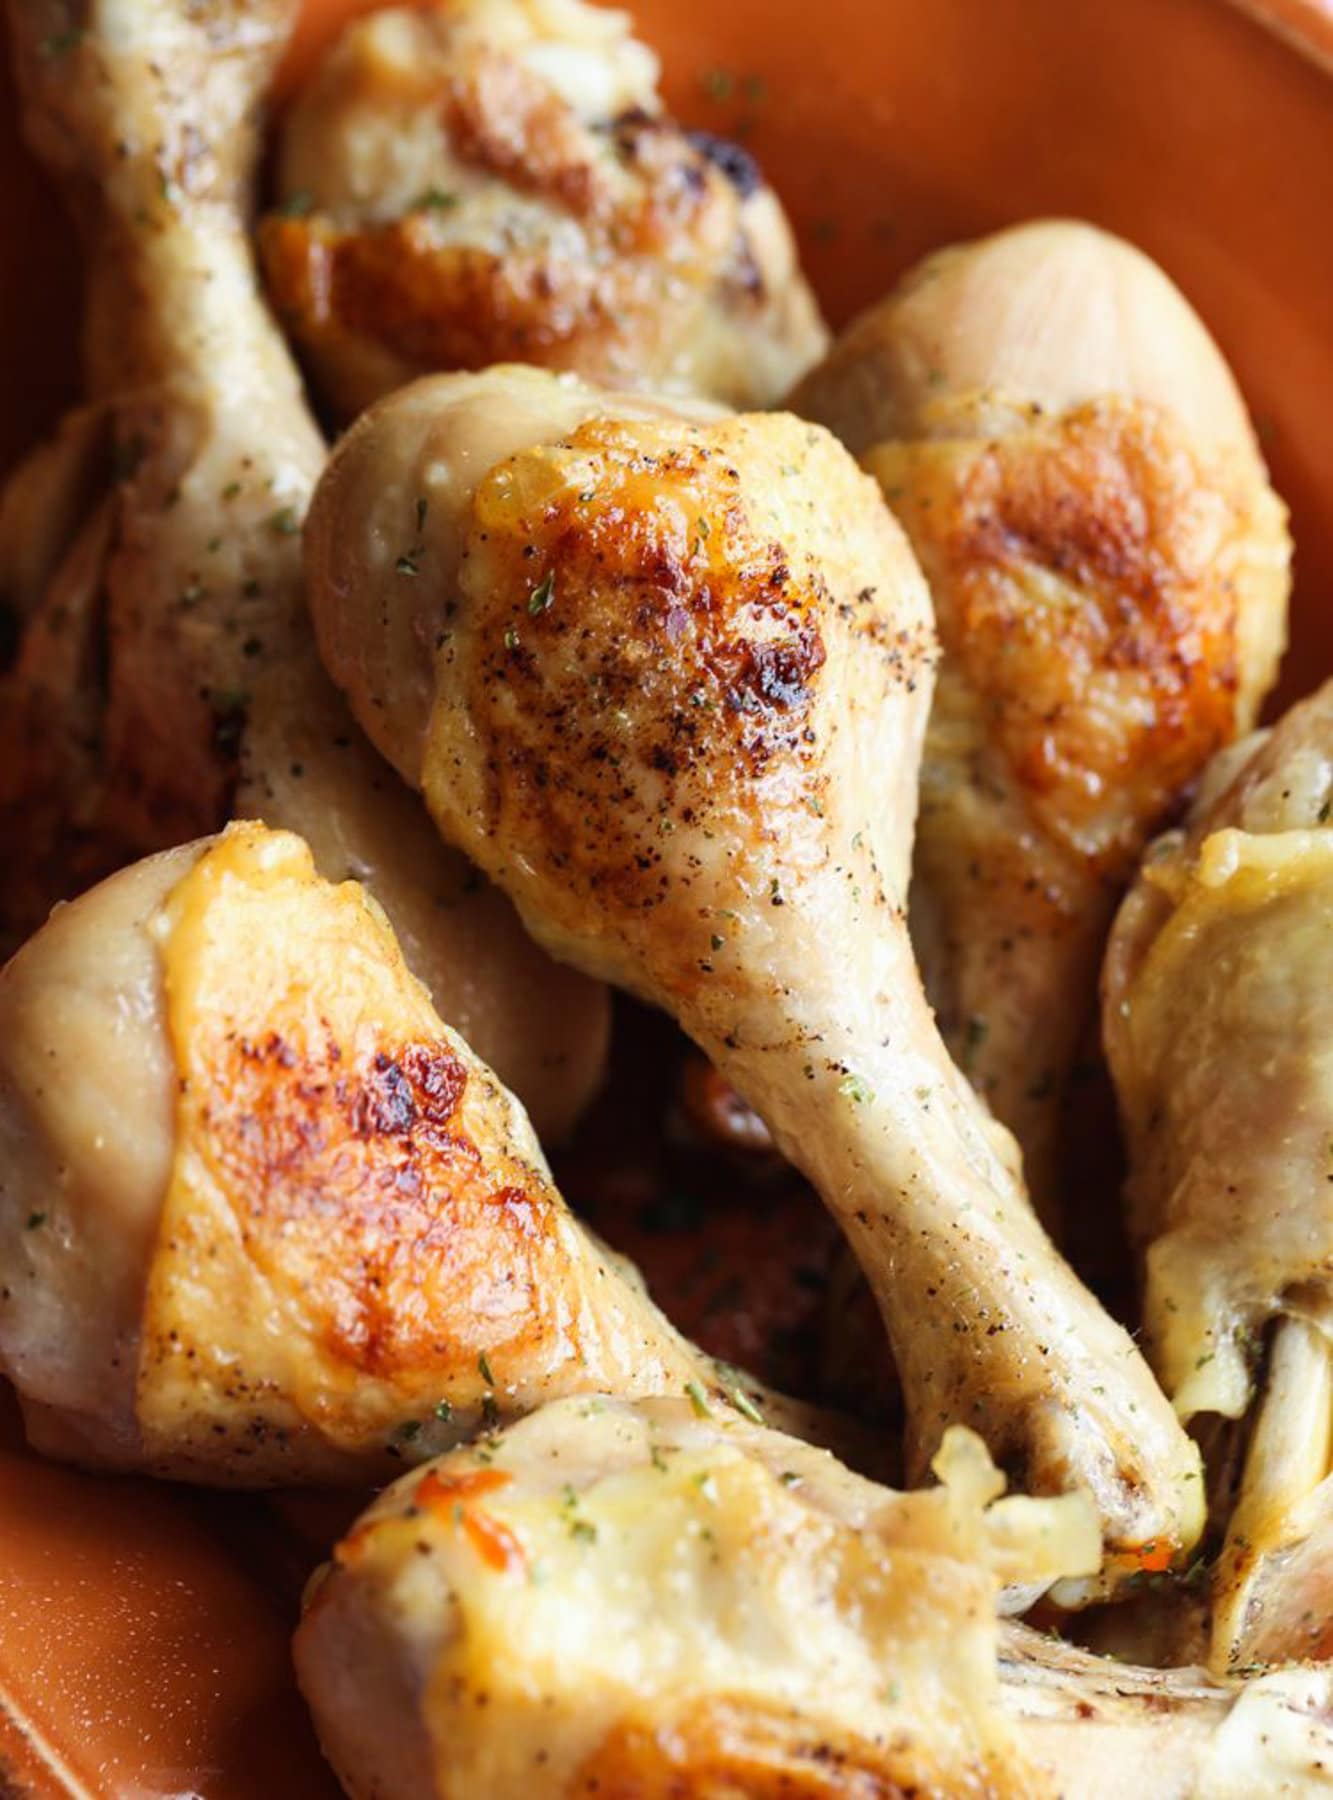 Baked chicken drumsticks on a serving dish.